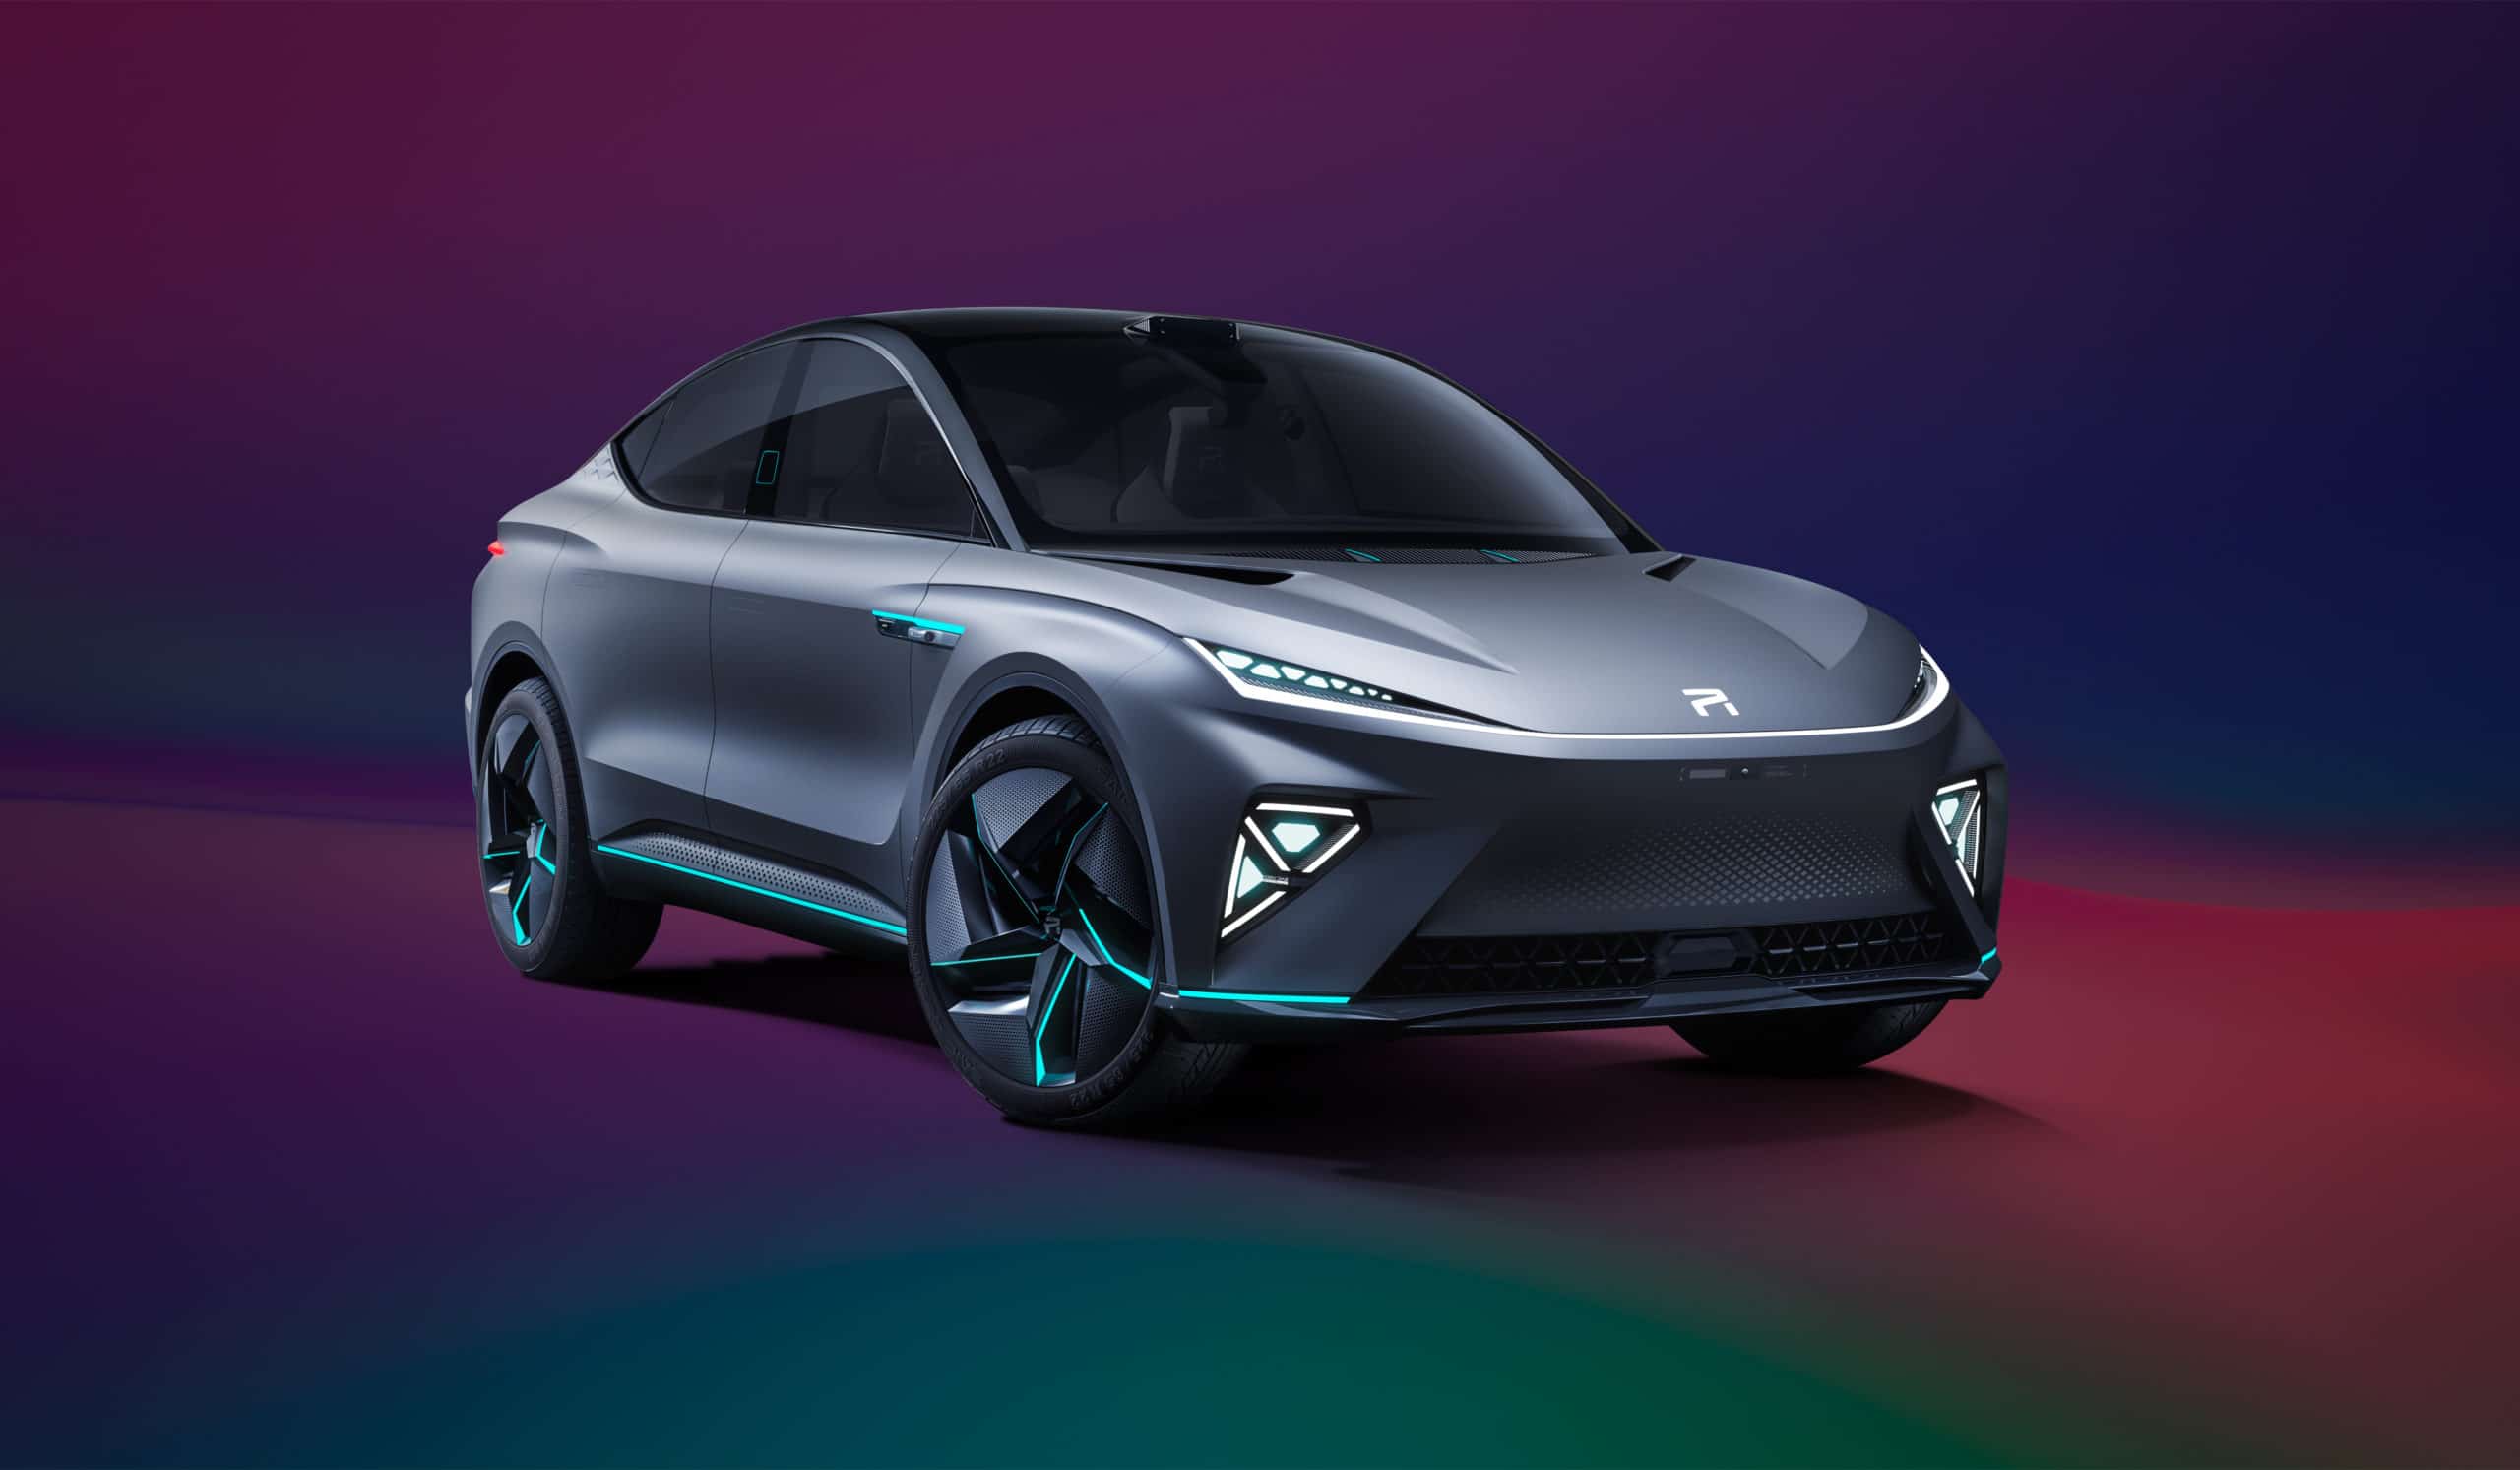 SAIC Motor Launches R Brand EV Line Powered by Luminar for Series Production